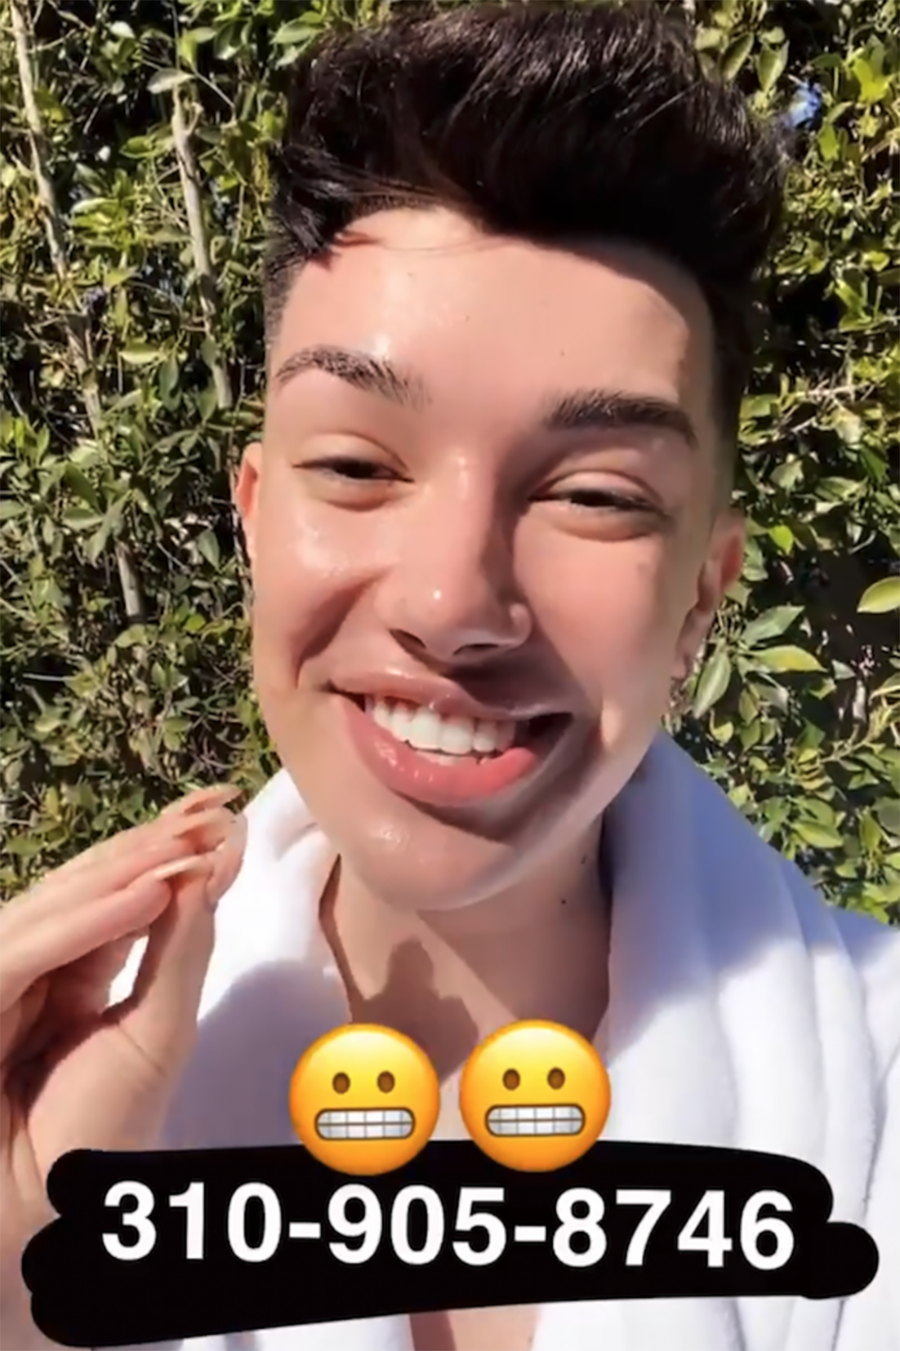 Artist James Charles Phone Number and House Address Details